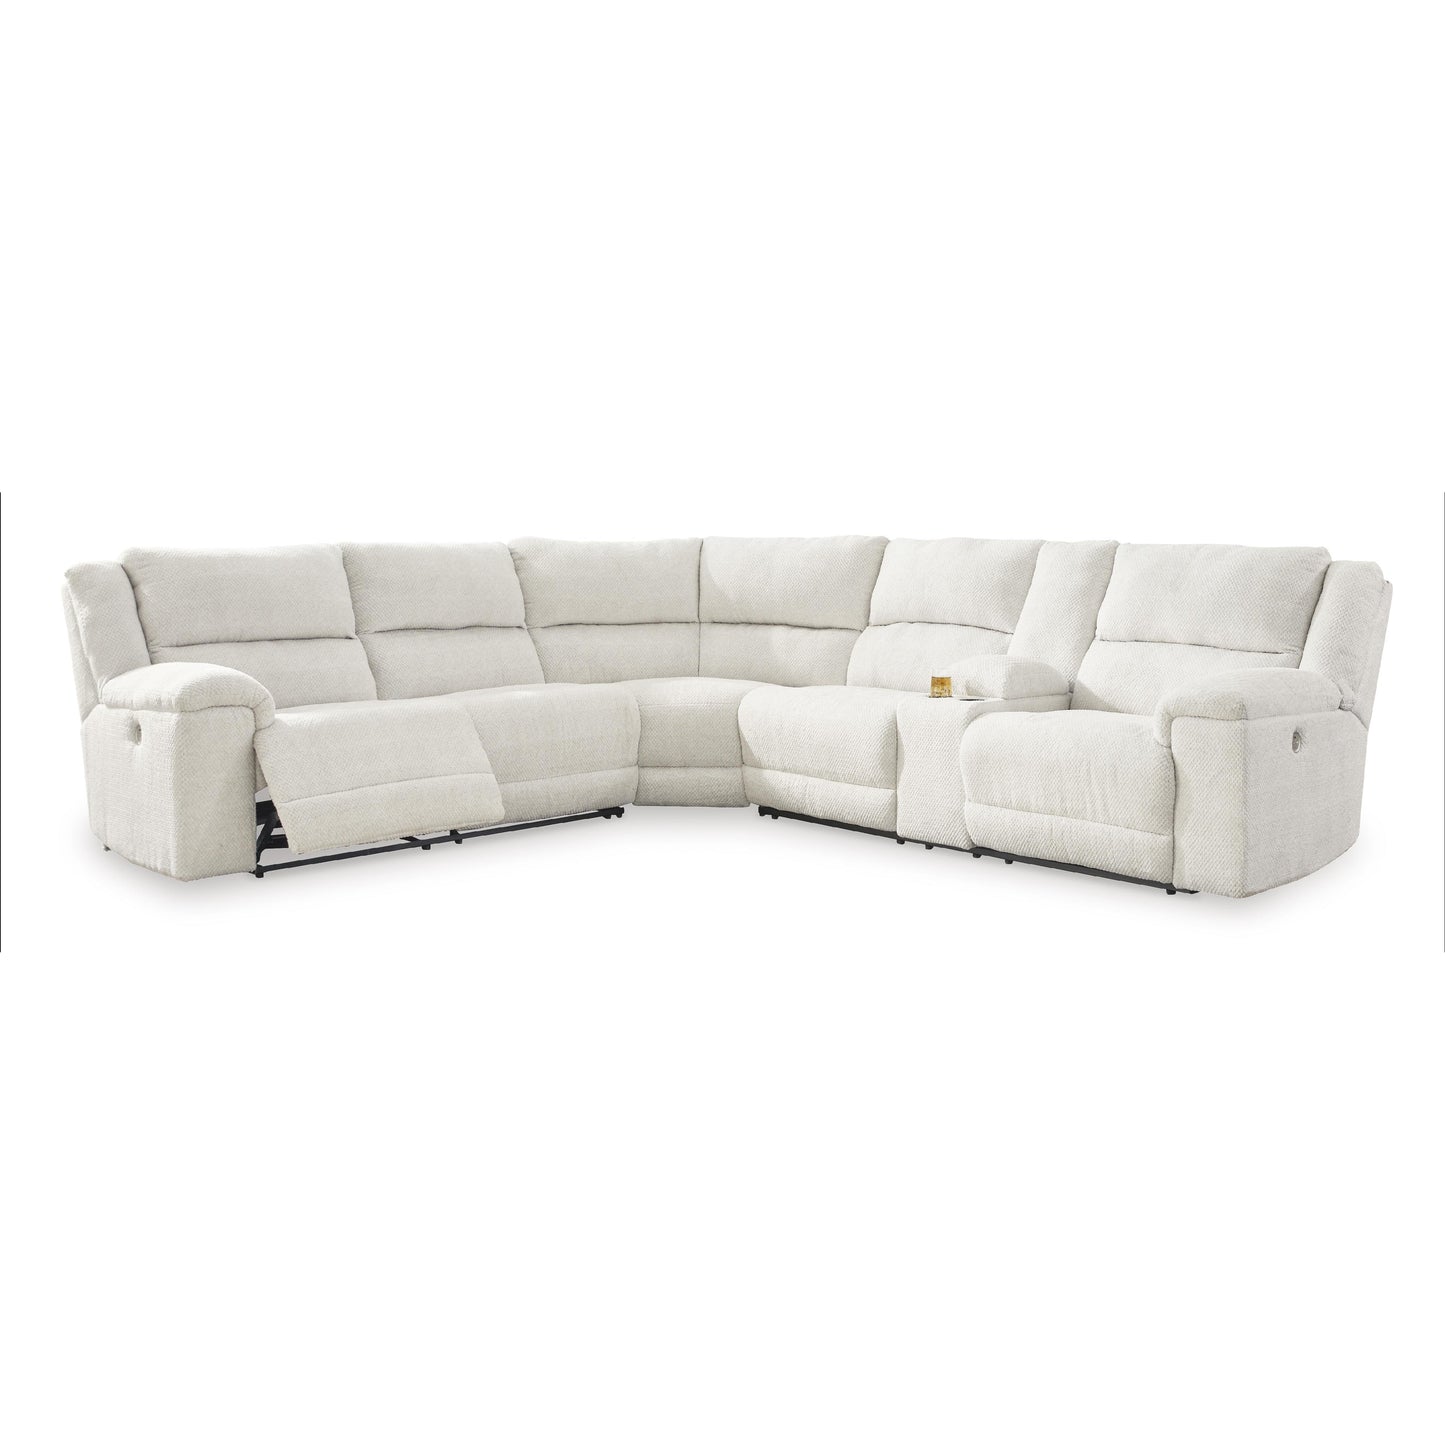 Signature Design by Ashley Keensburg Power Reclining Fabric 3 pc Sectional 6180763/6180777/6180790 IMAGE 1